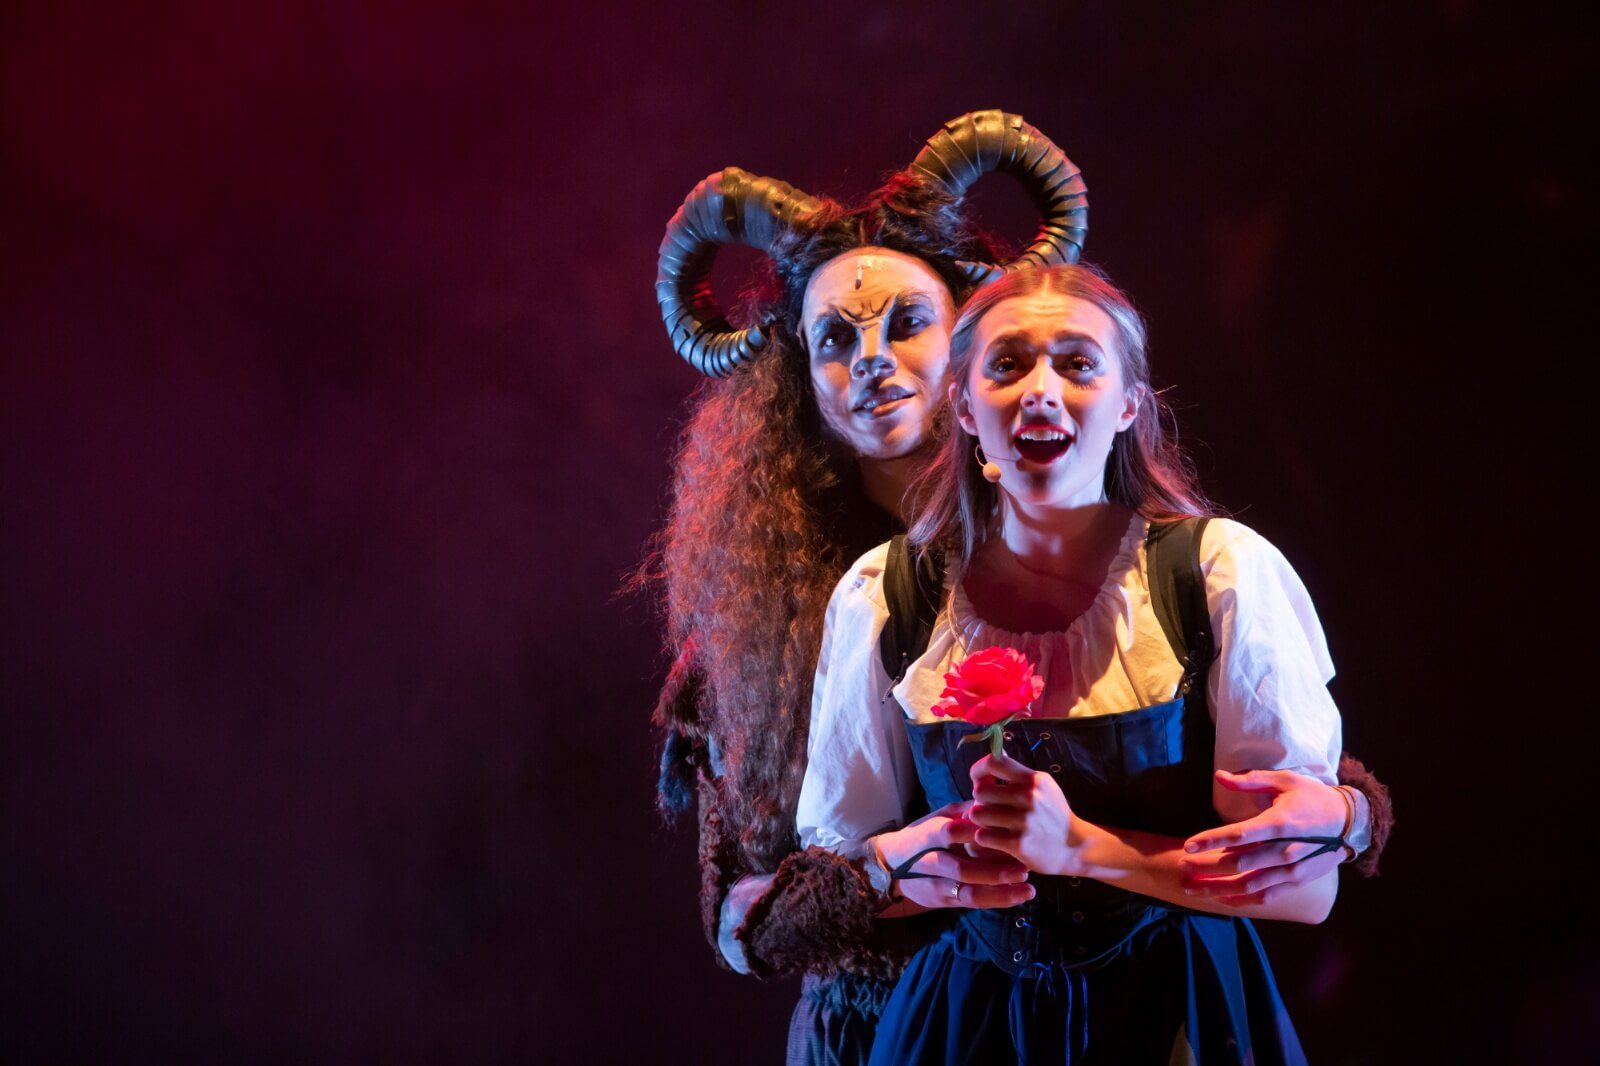 Belle and the Beast in Beauty and the Beast at the Old Rep Birmingham standing together with a rose